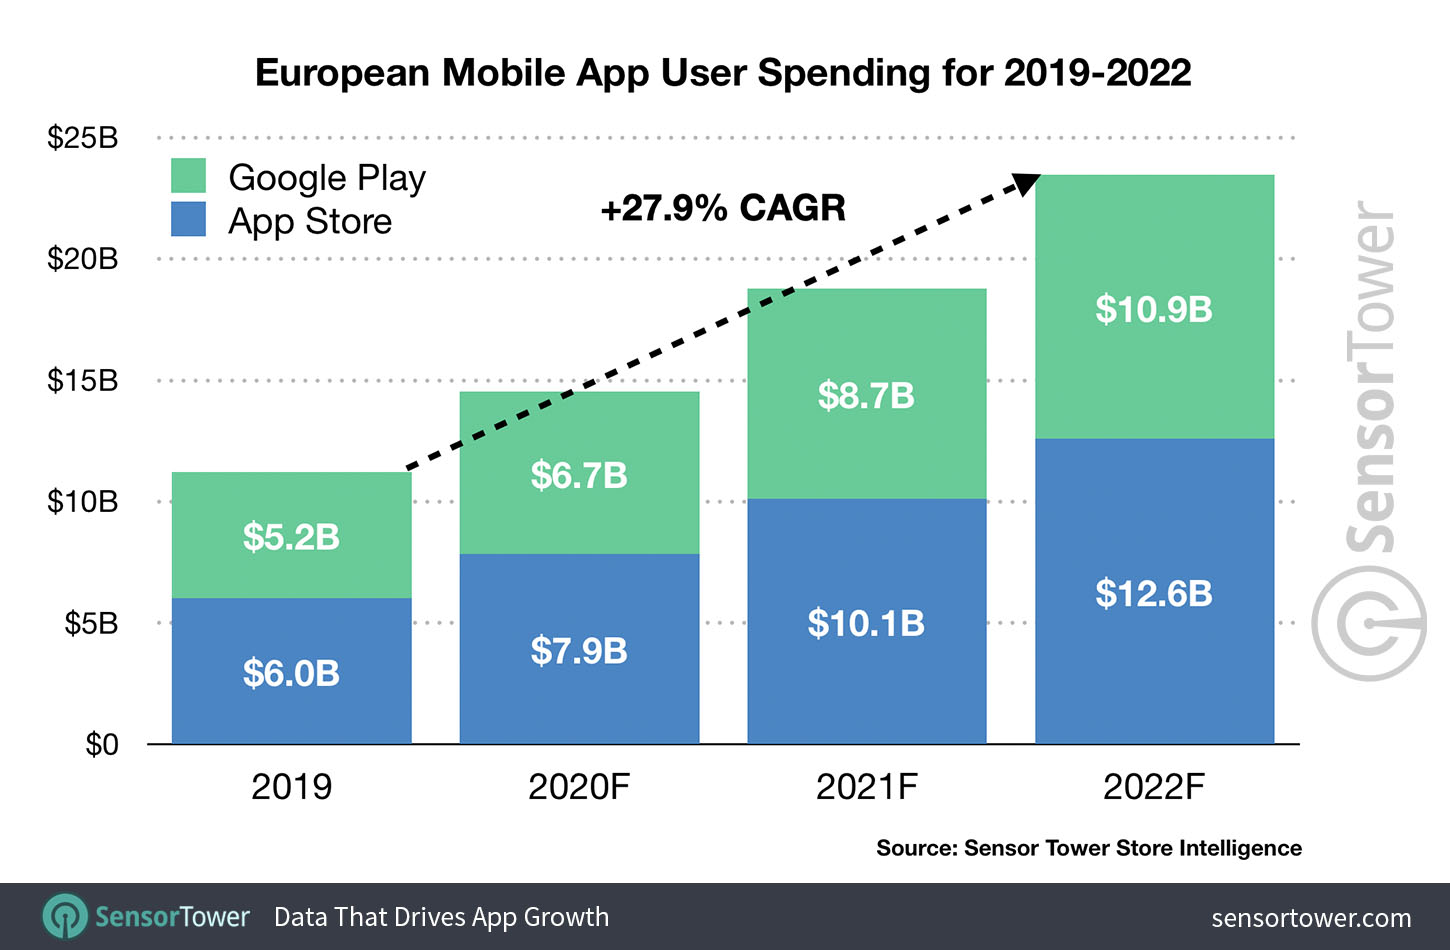 Top European countries by mobile app user spending 2019-2022